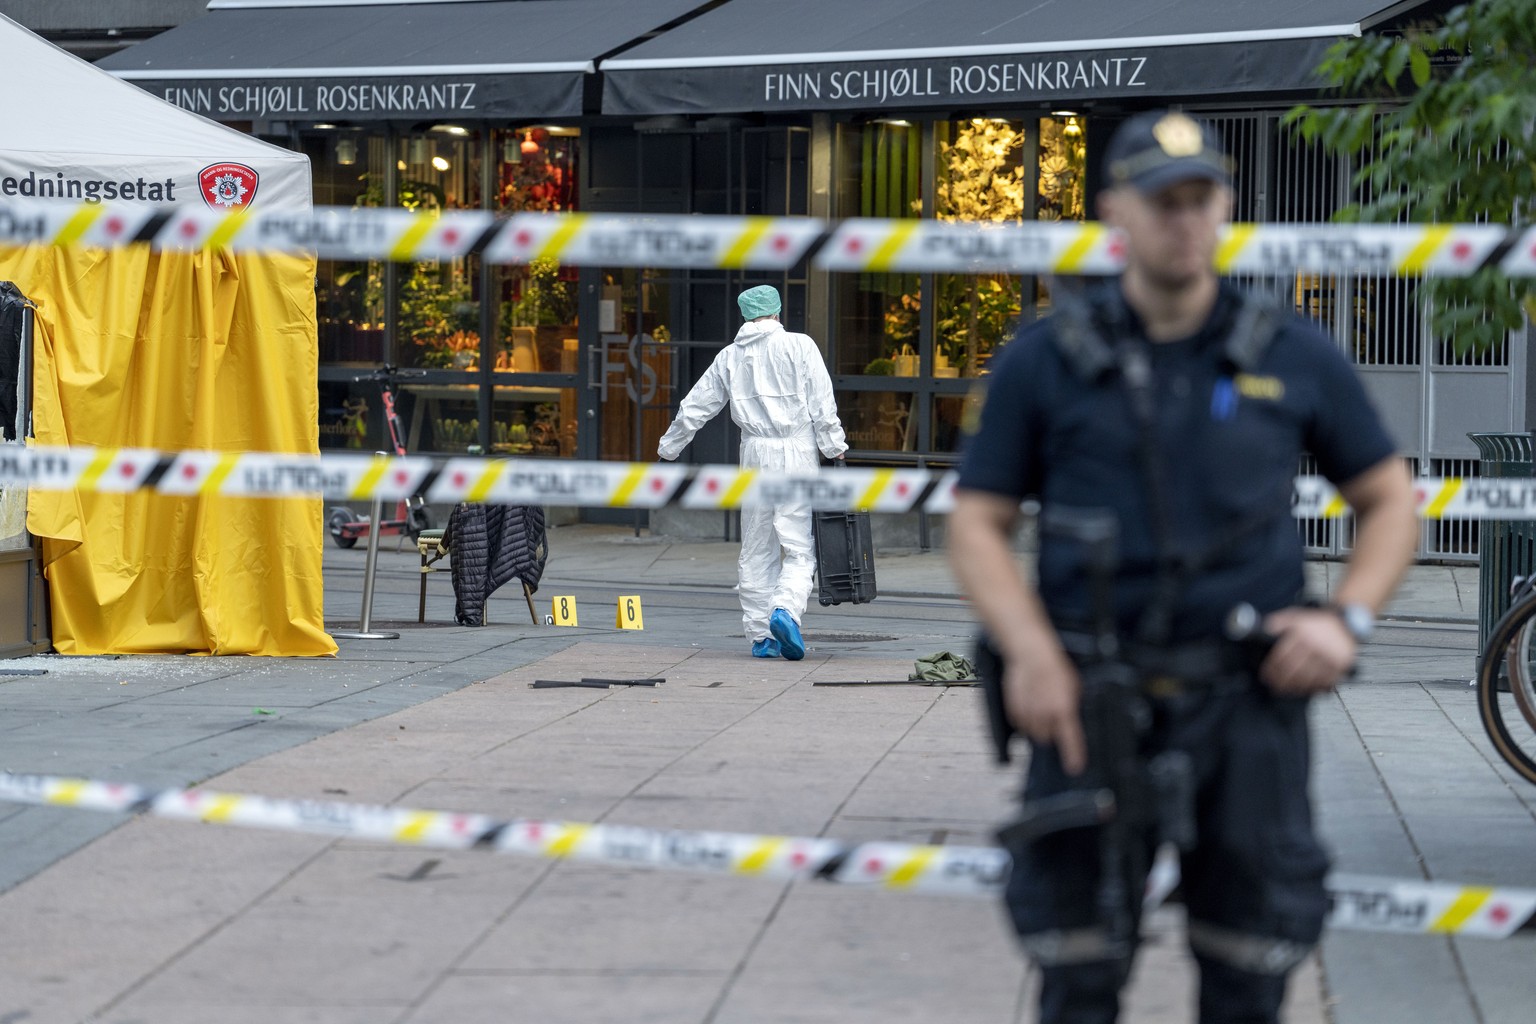 Police at the scene of a shooting in central Oslo, Saturday, June 25, 2022. Norwegian police say they are investigating an overnight shooting in Oslo that killed two people and injured more than a doz ...